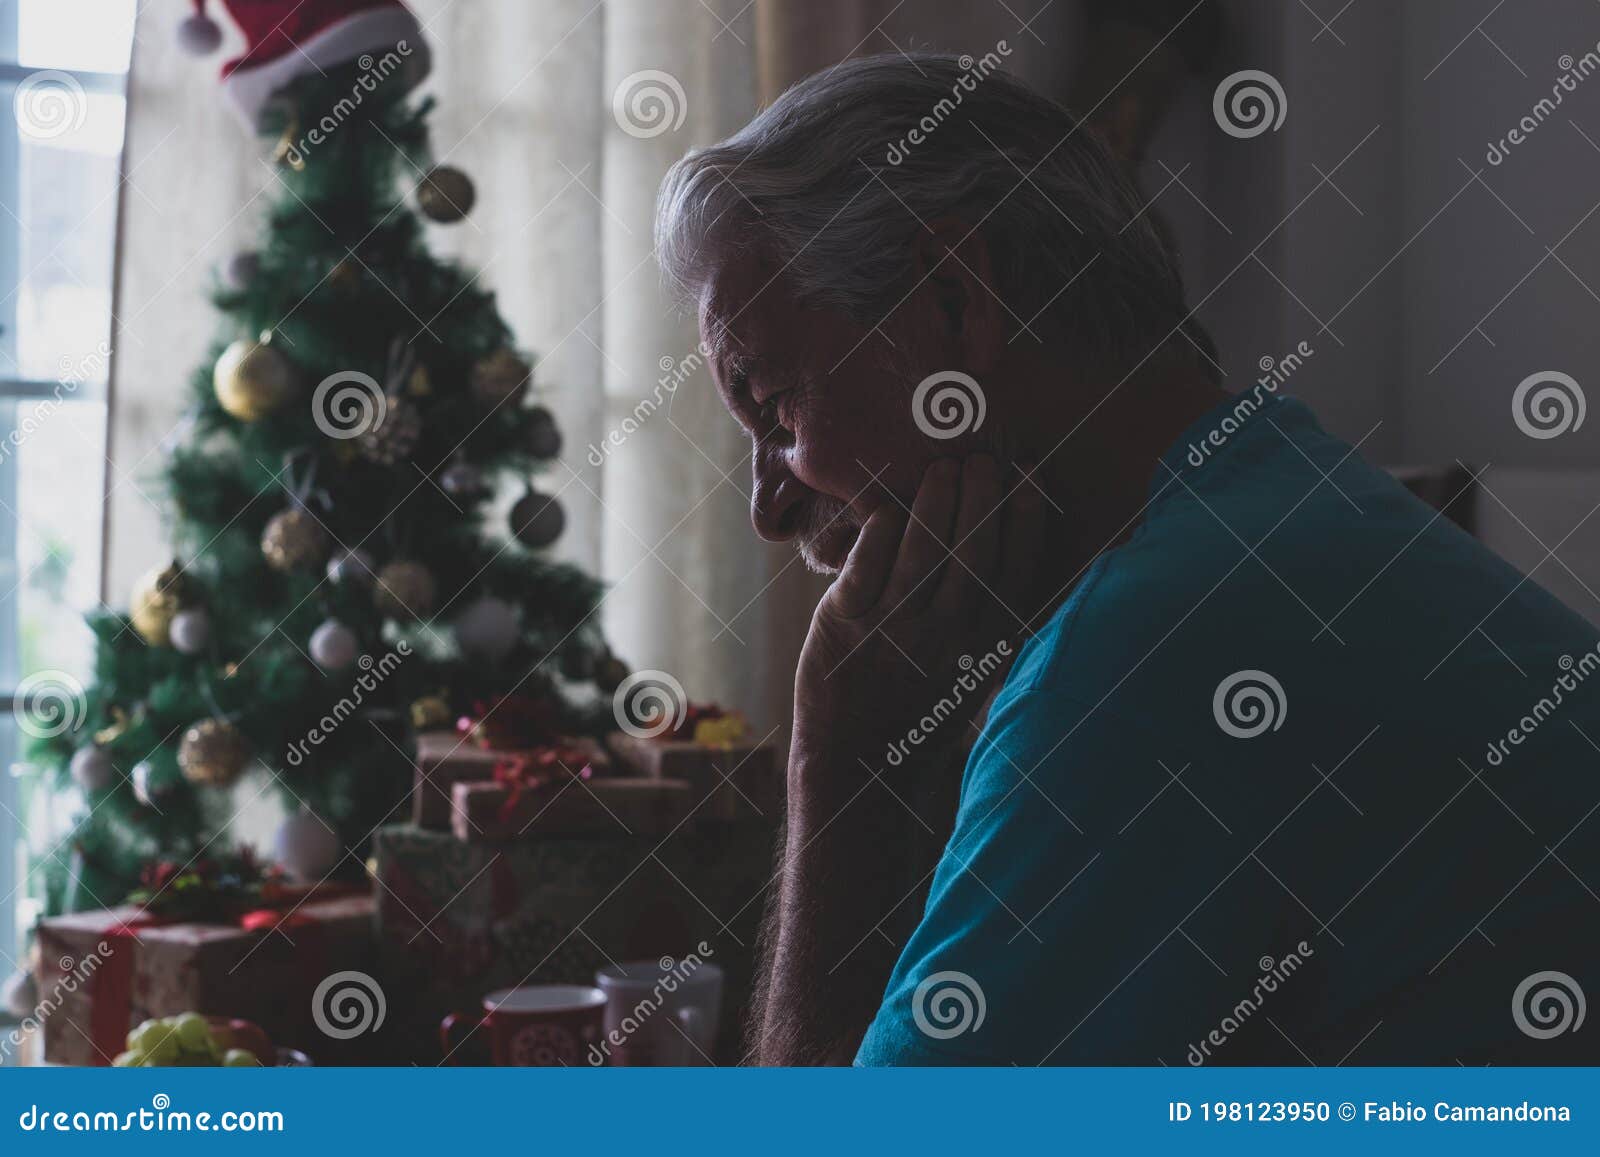 one alone and sad senior mature man sitting on the sofa at home celebrating christmas day alone with anyone people - upset adult